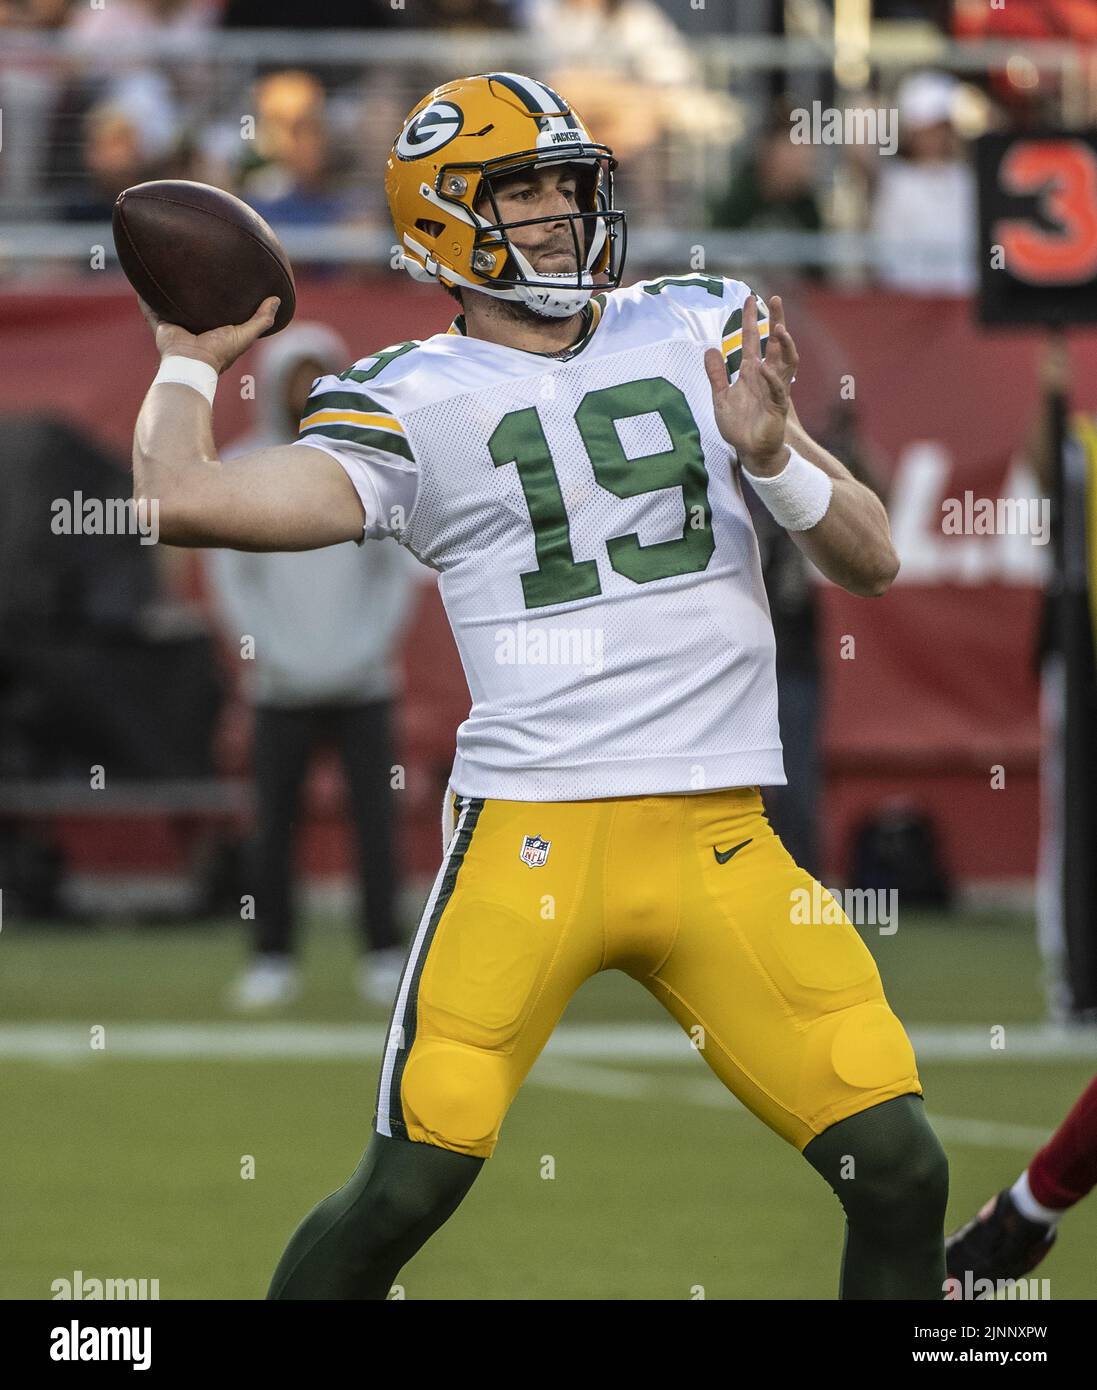 Santa Clara, USA. 13th Aug, 2022. Green Bay Packers quarterback Danny Etling (19) throws against the San Francisco 49ers in the third quarter at Levi's Stadium in Santa Clara, California on Friday, August 12, 2022. The 49ers defeated the Packers 28-21 in their first preseason game Photo by Terry Schmitt/UPI Credit: UPI/Alamy Live News Stock Photo